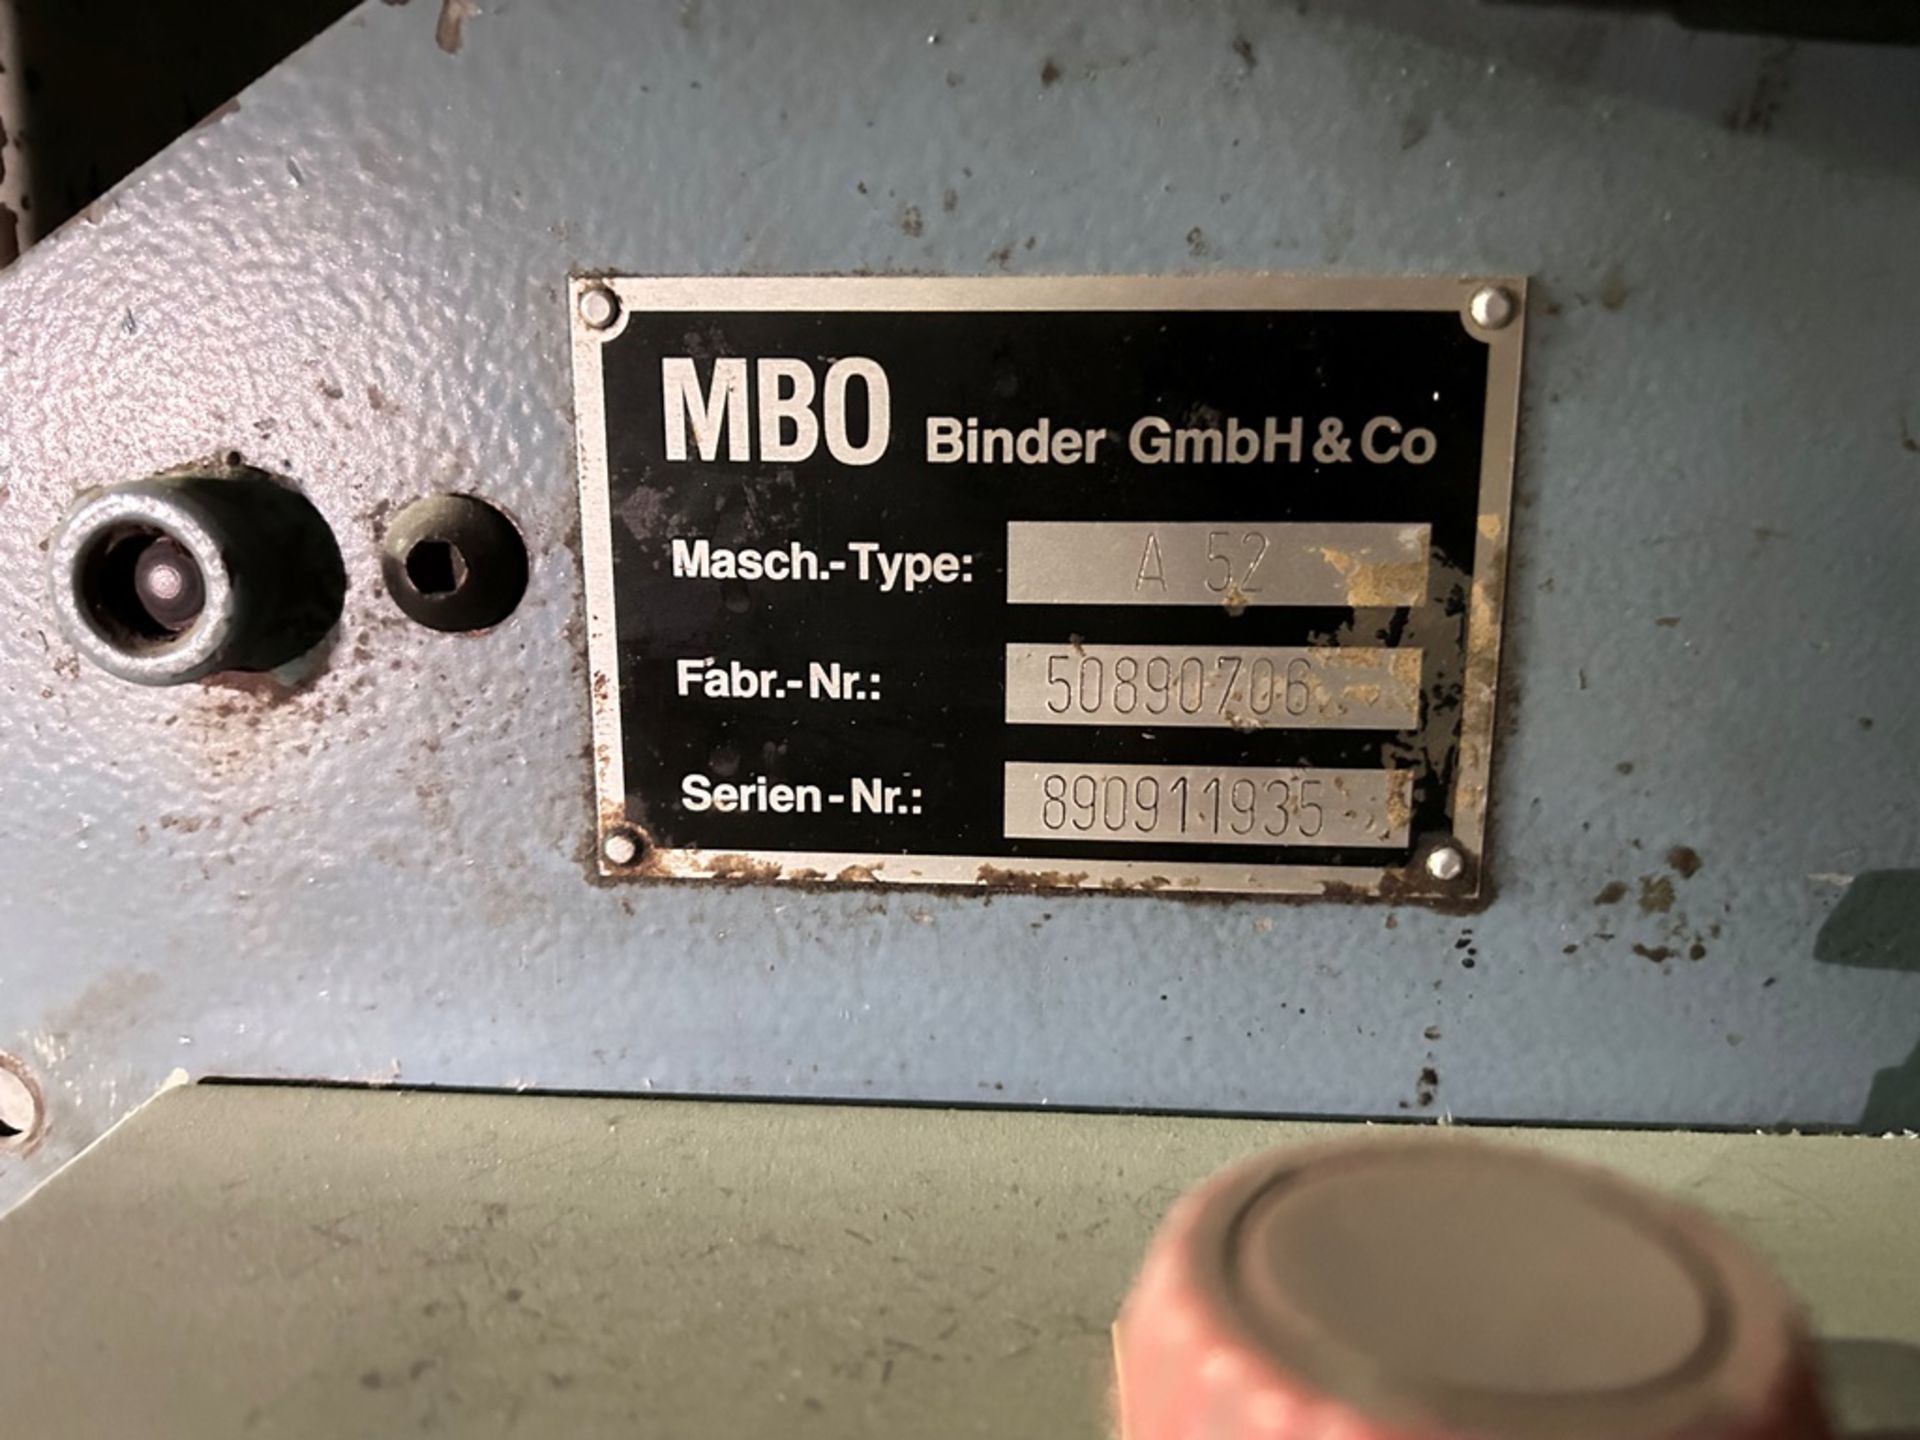 MBO 750 x 520 mm format folding machine, Model T52, Serial No. 890911935, Year 1984, 220V, 4 folds, - Image 6 of 9